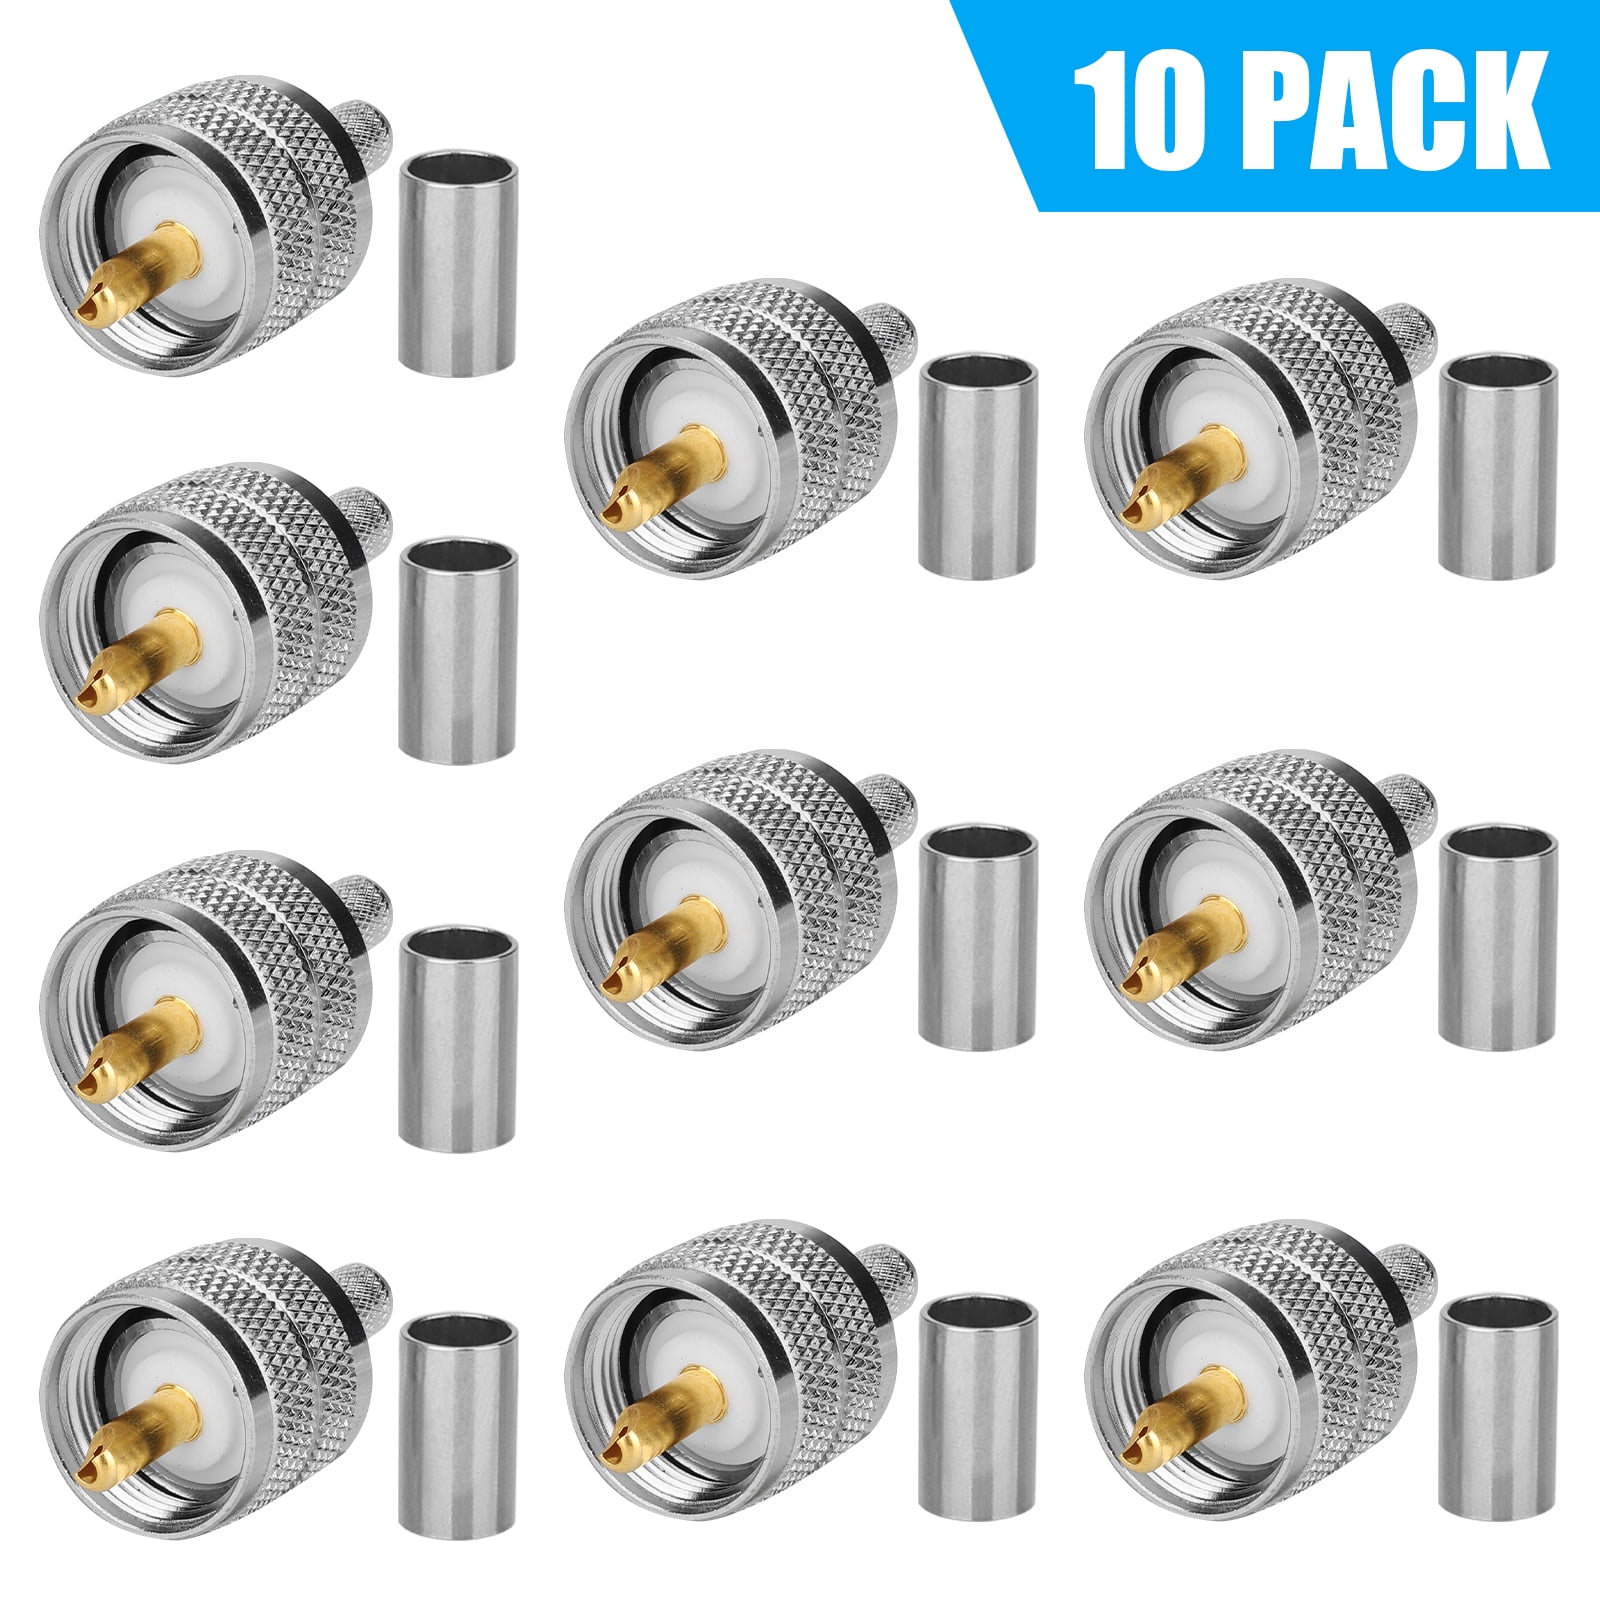 NEW 10 Pack PL259 Solder Connector Plug With Reducer for RG8X Coaxial Coax Cable 